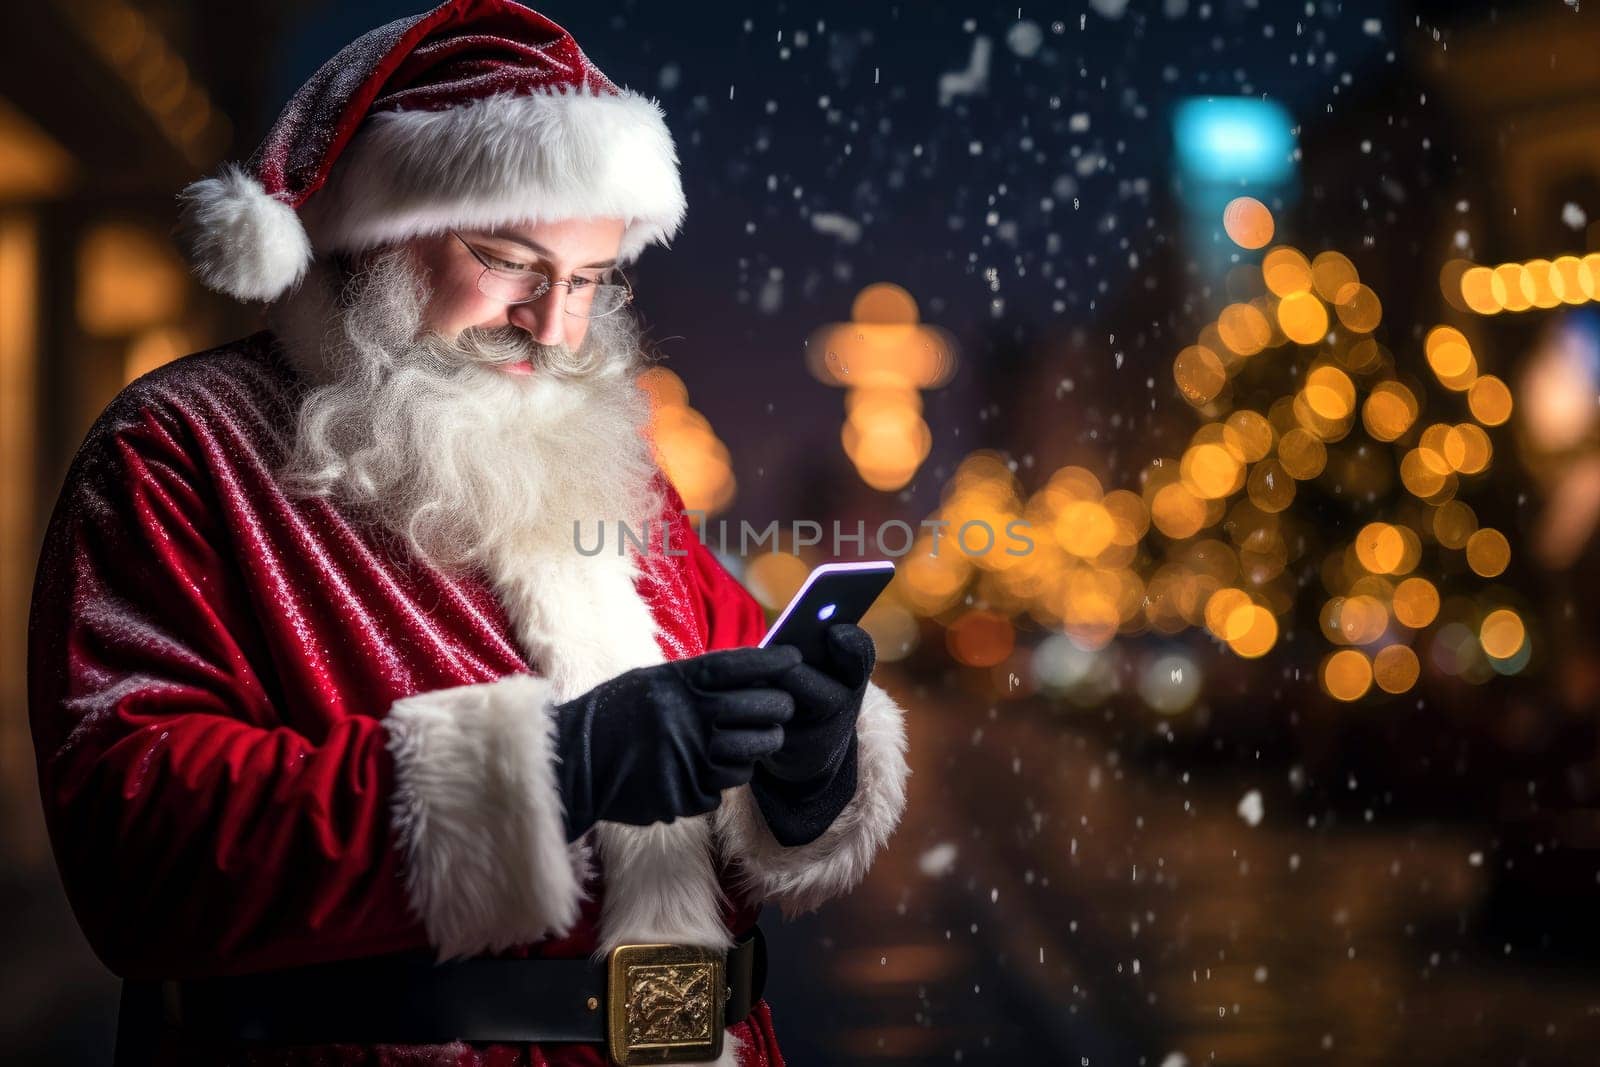 Santa Claus uses a smartphone to order gifts and use GPS to find addresses by andreyz